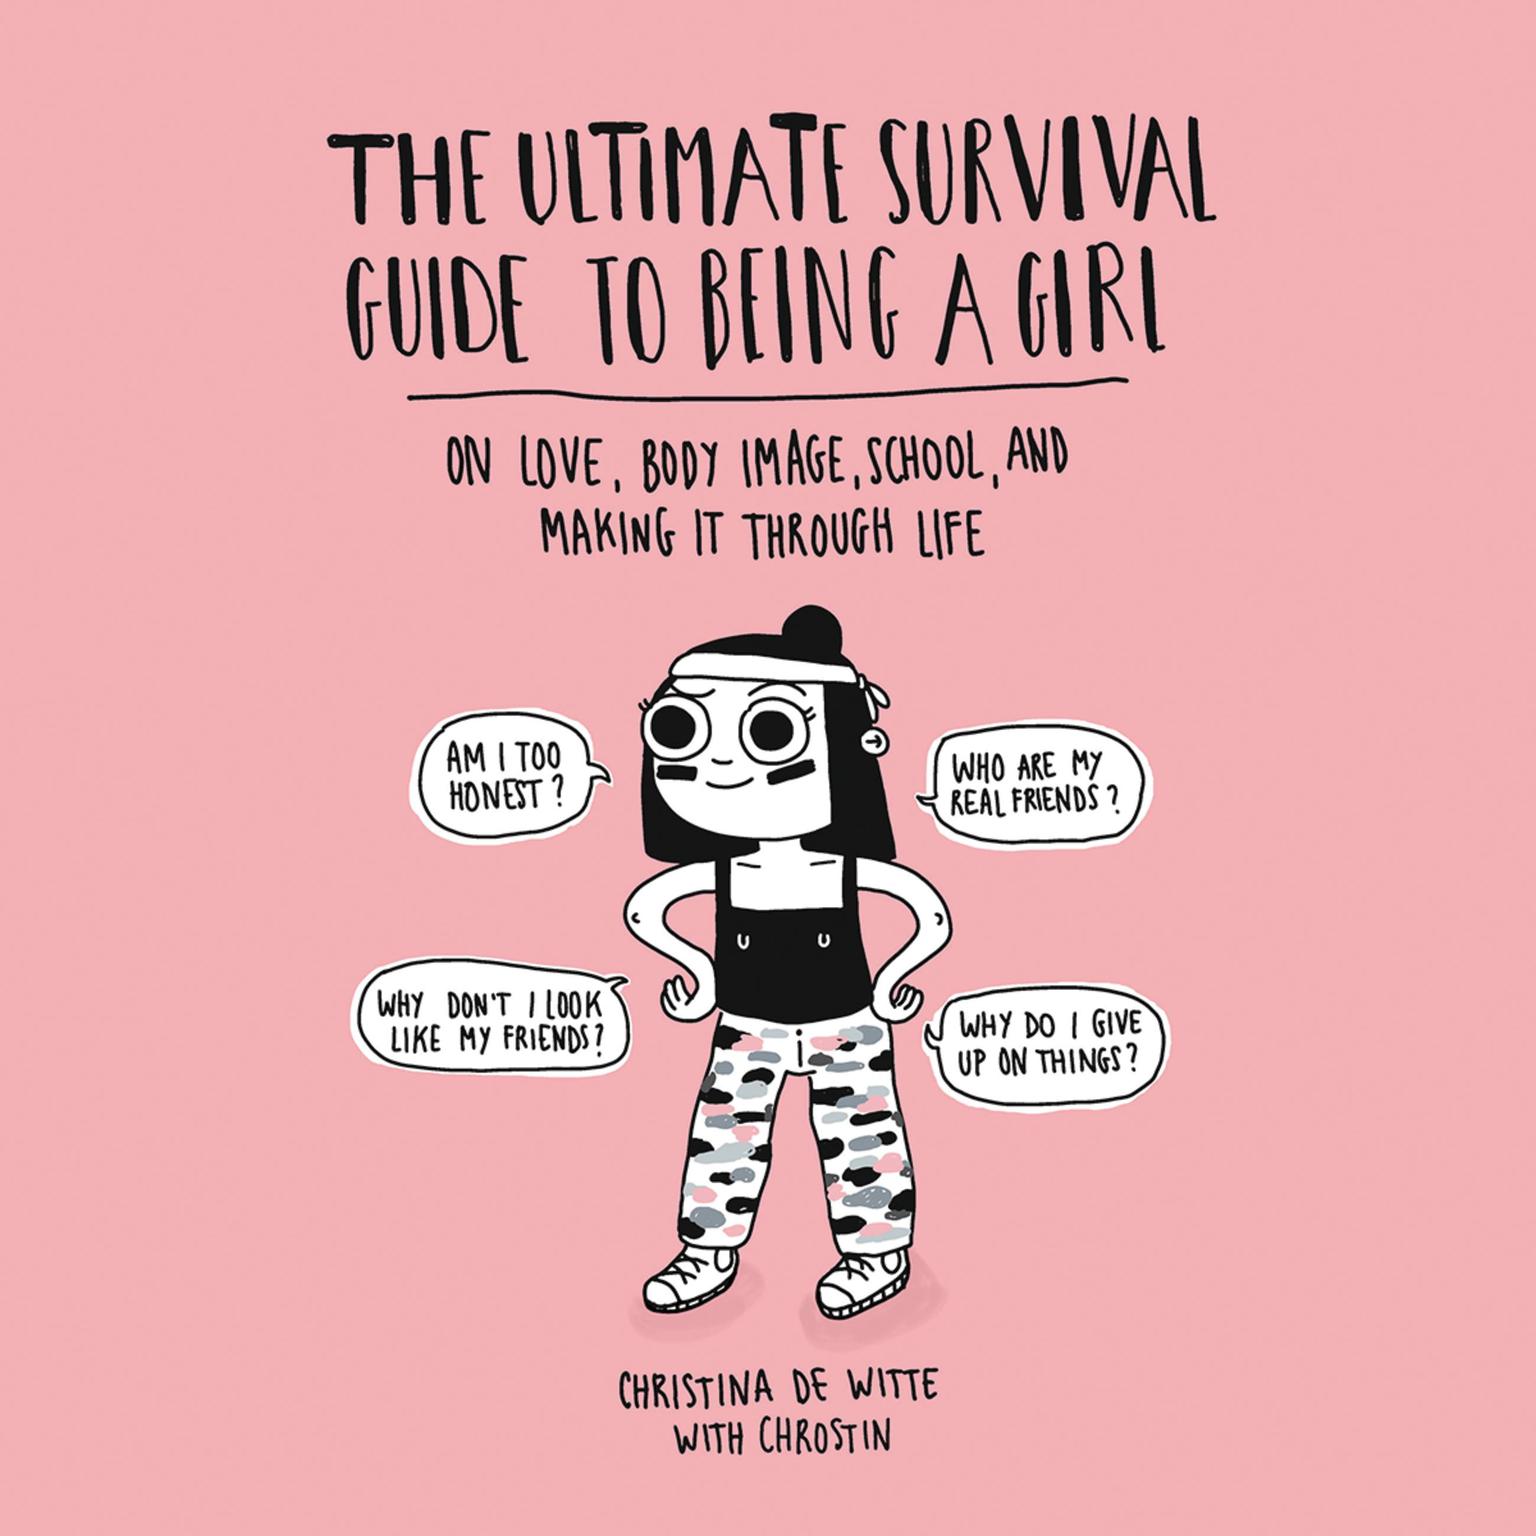 The Ultimate Survival Guide to Being a Girl: On Love, Body Image, School, and Making It Through Life Audiobook, by Christina De Witte